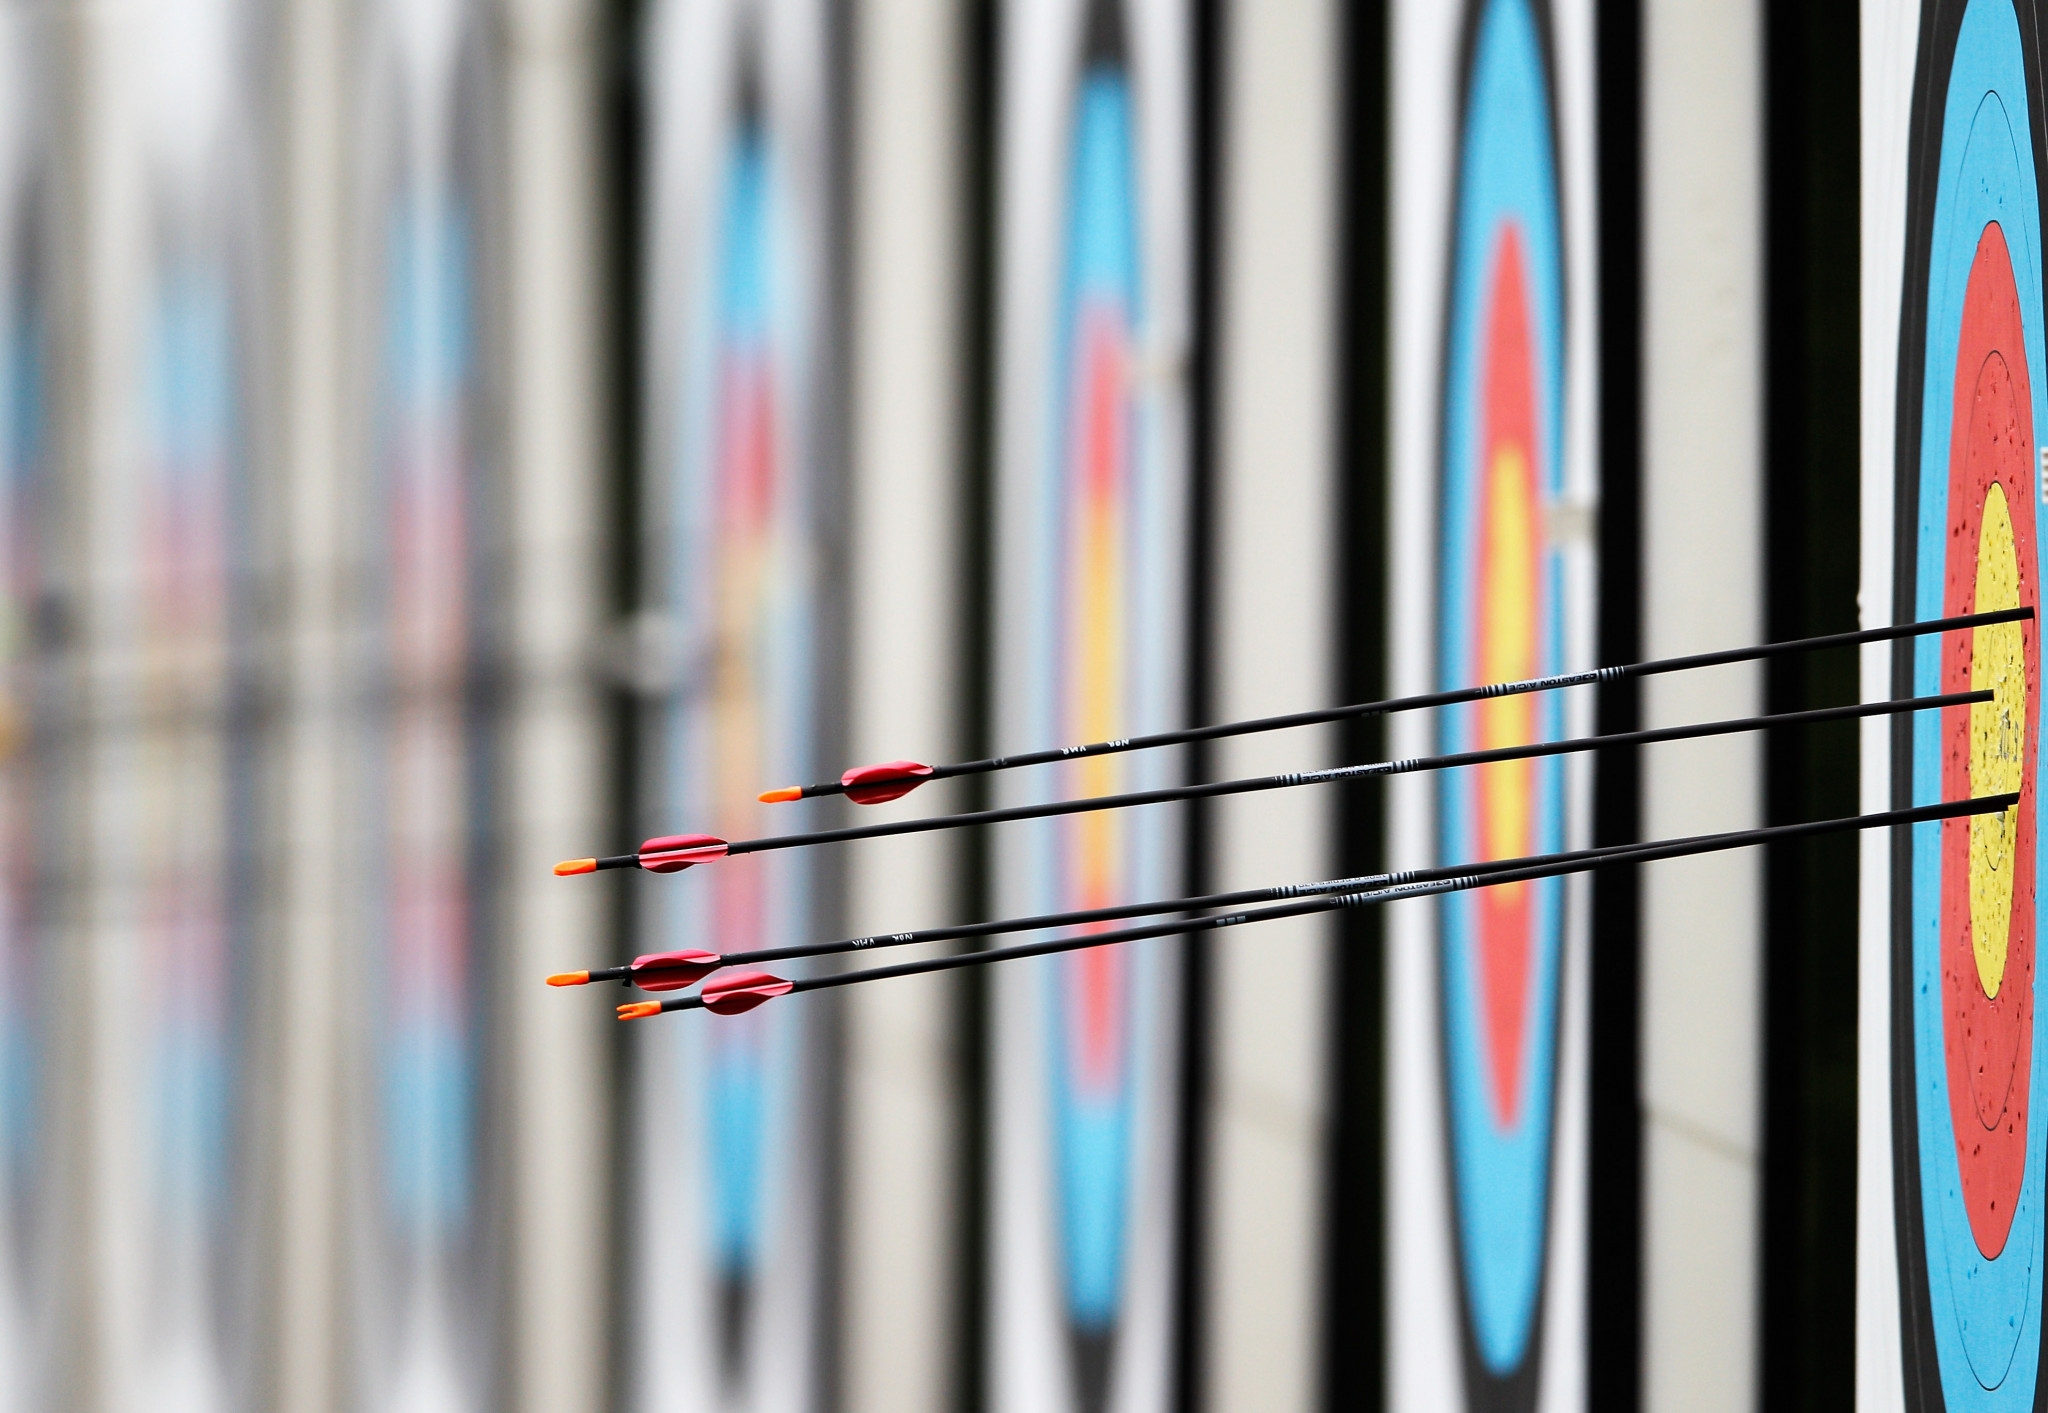 The European Archery Championships are being staged in Munich, where the Congress took place ©Getty Images